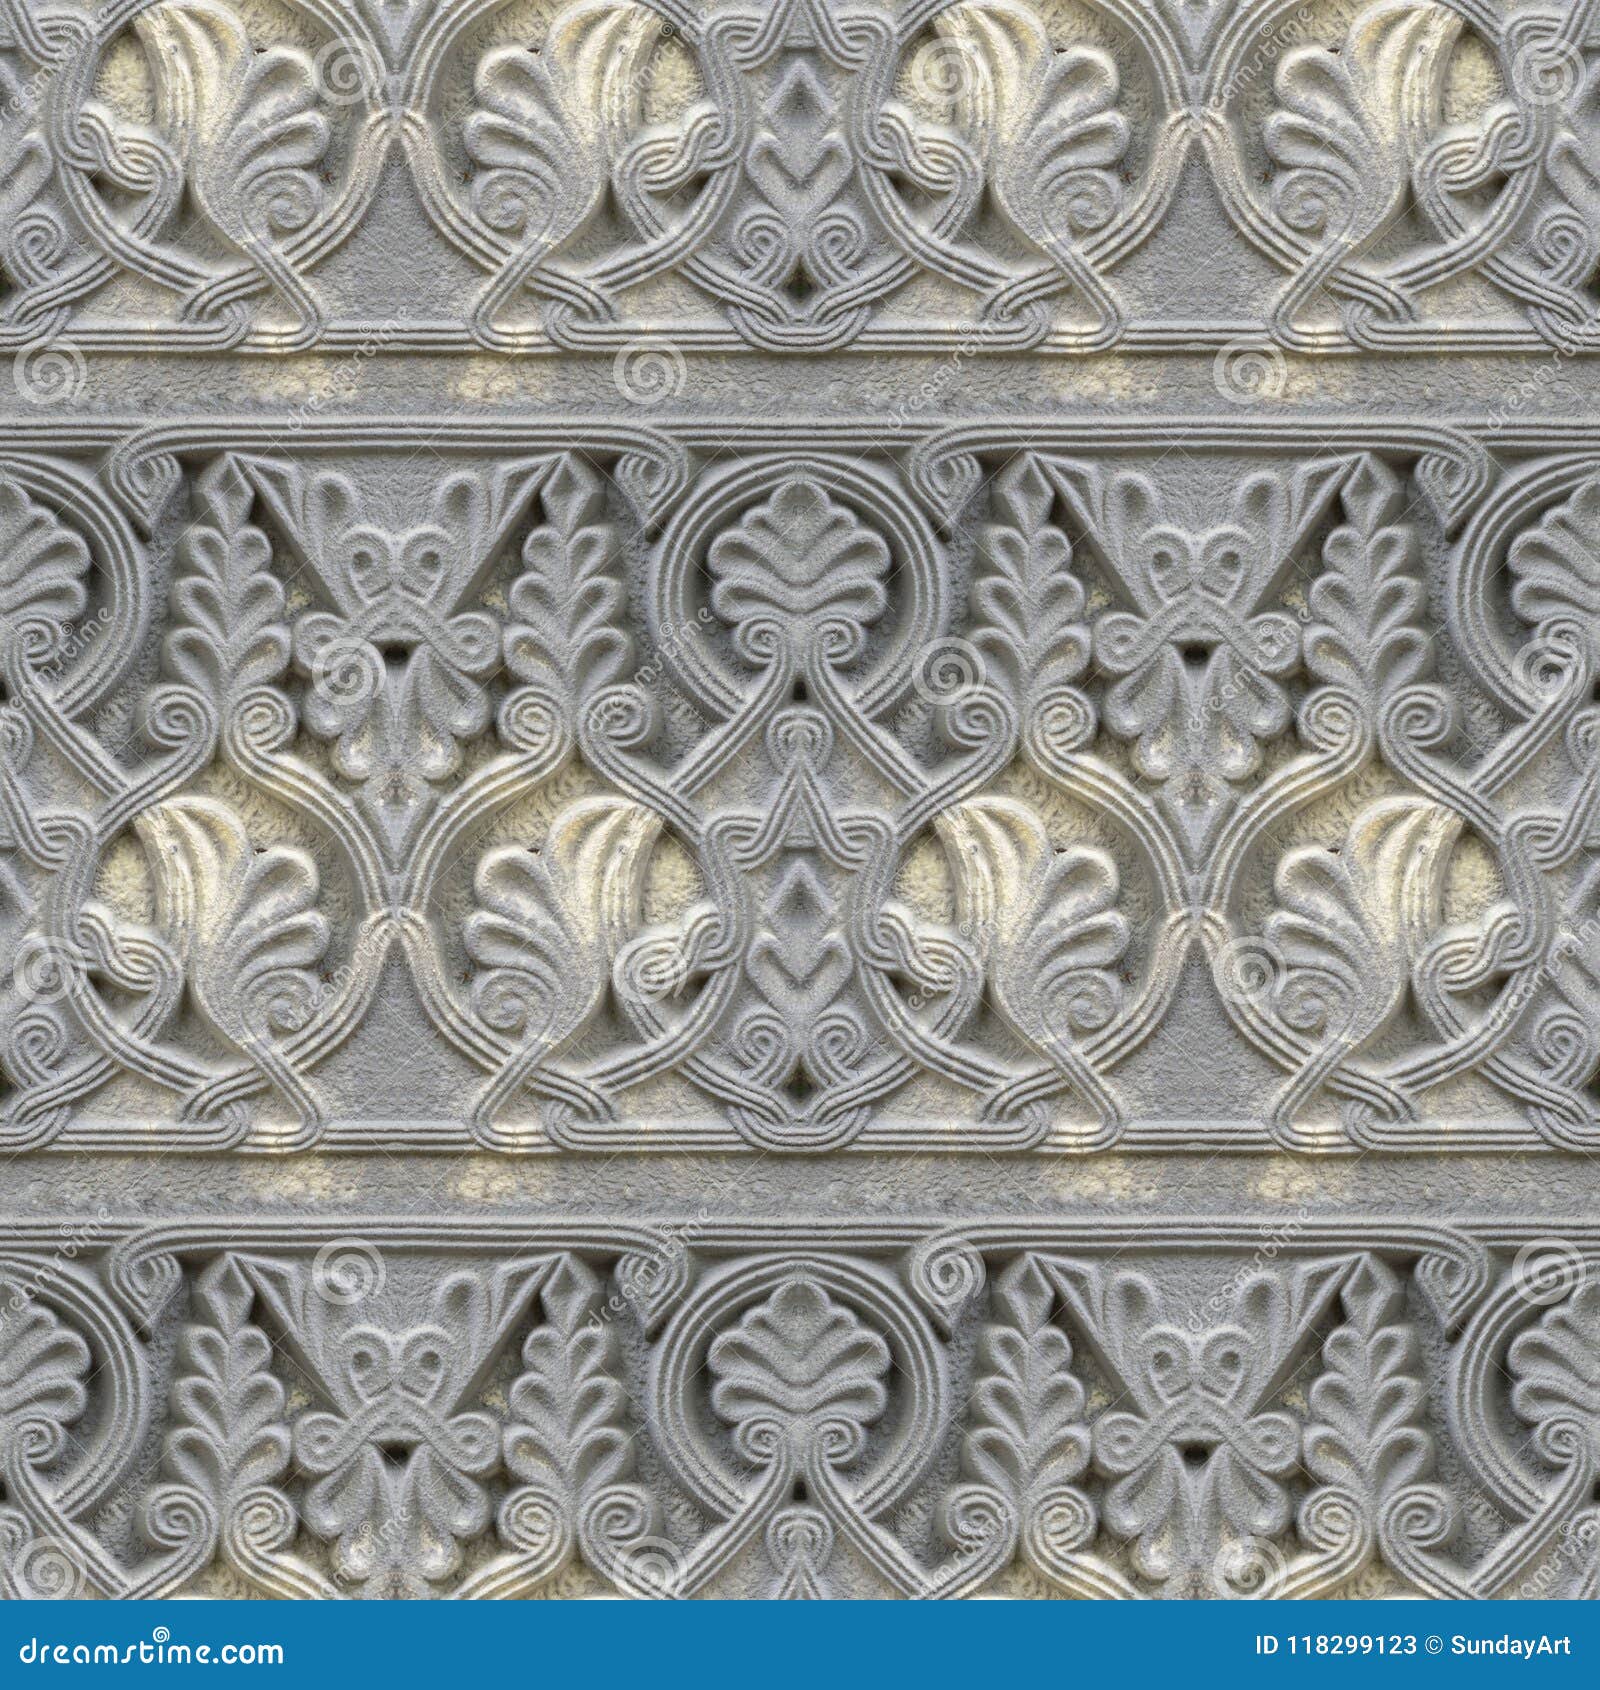 Seamless Photo Texture Of India Ornament On The Stone Plates